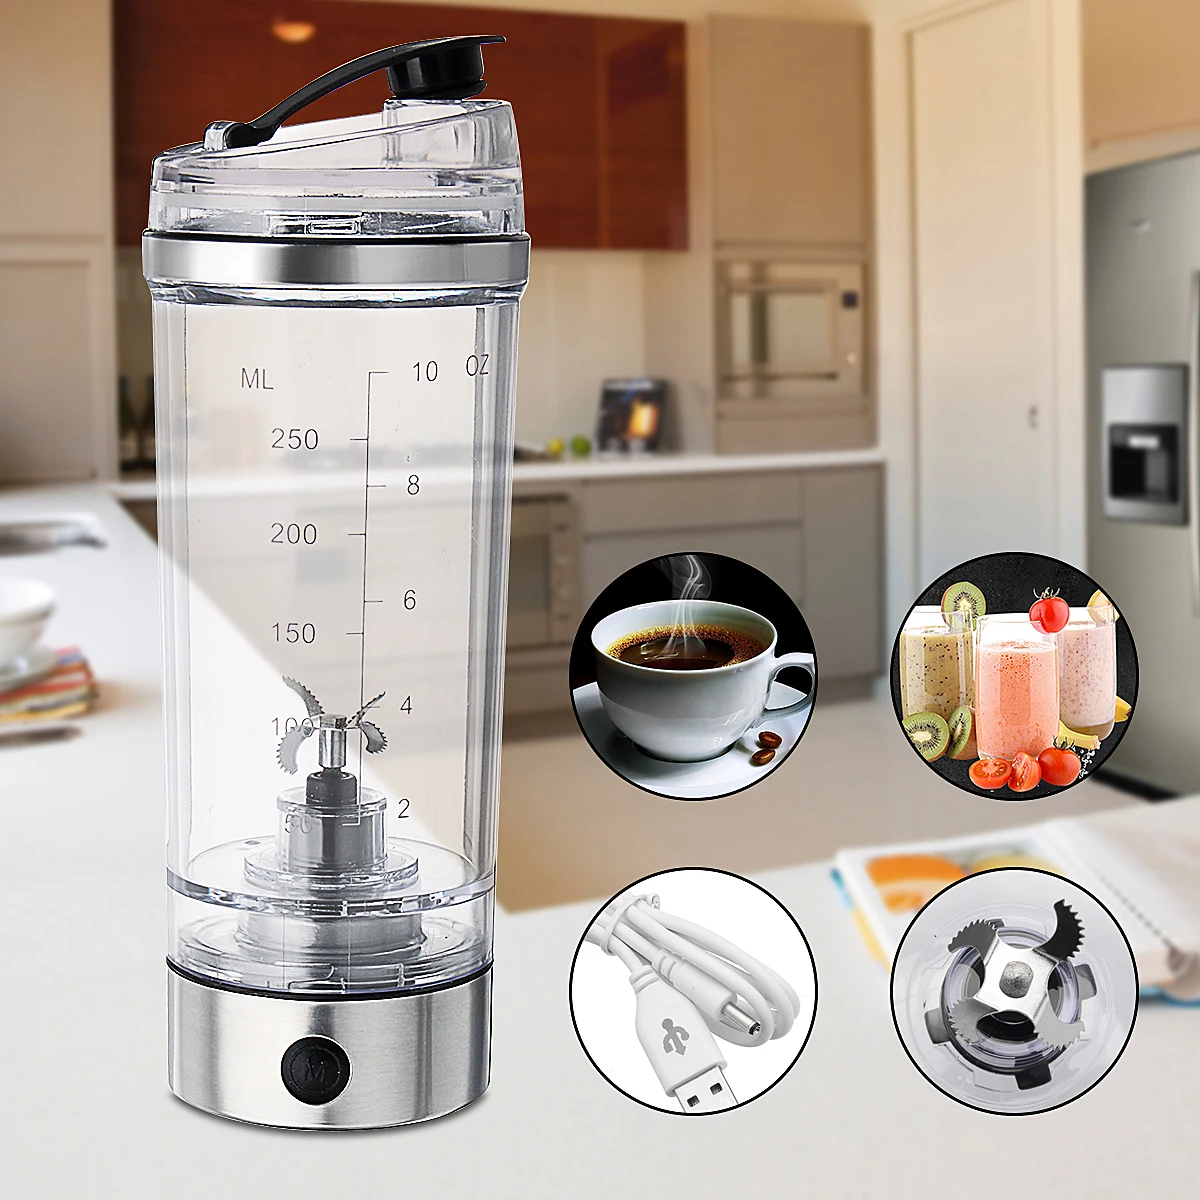 Portable Electric Shaker Blender Drink Cup Protein Nutrition Mixer